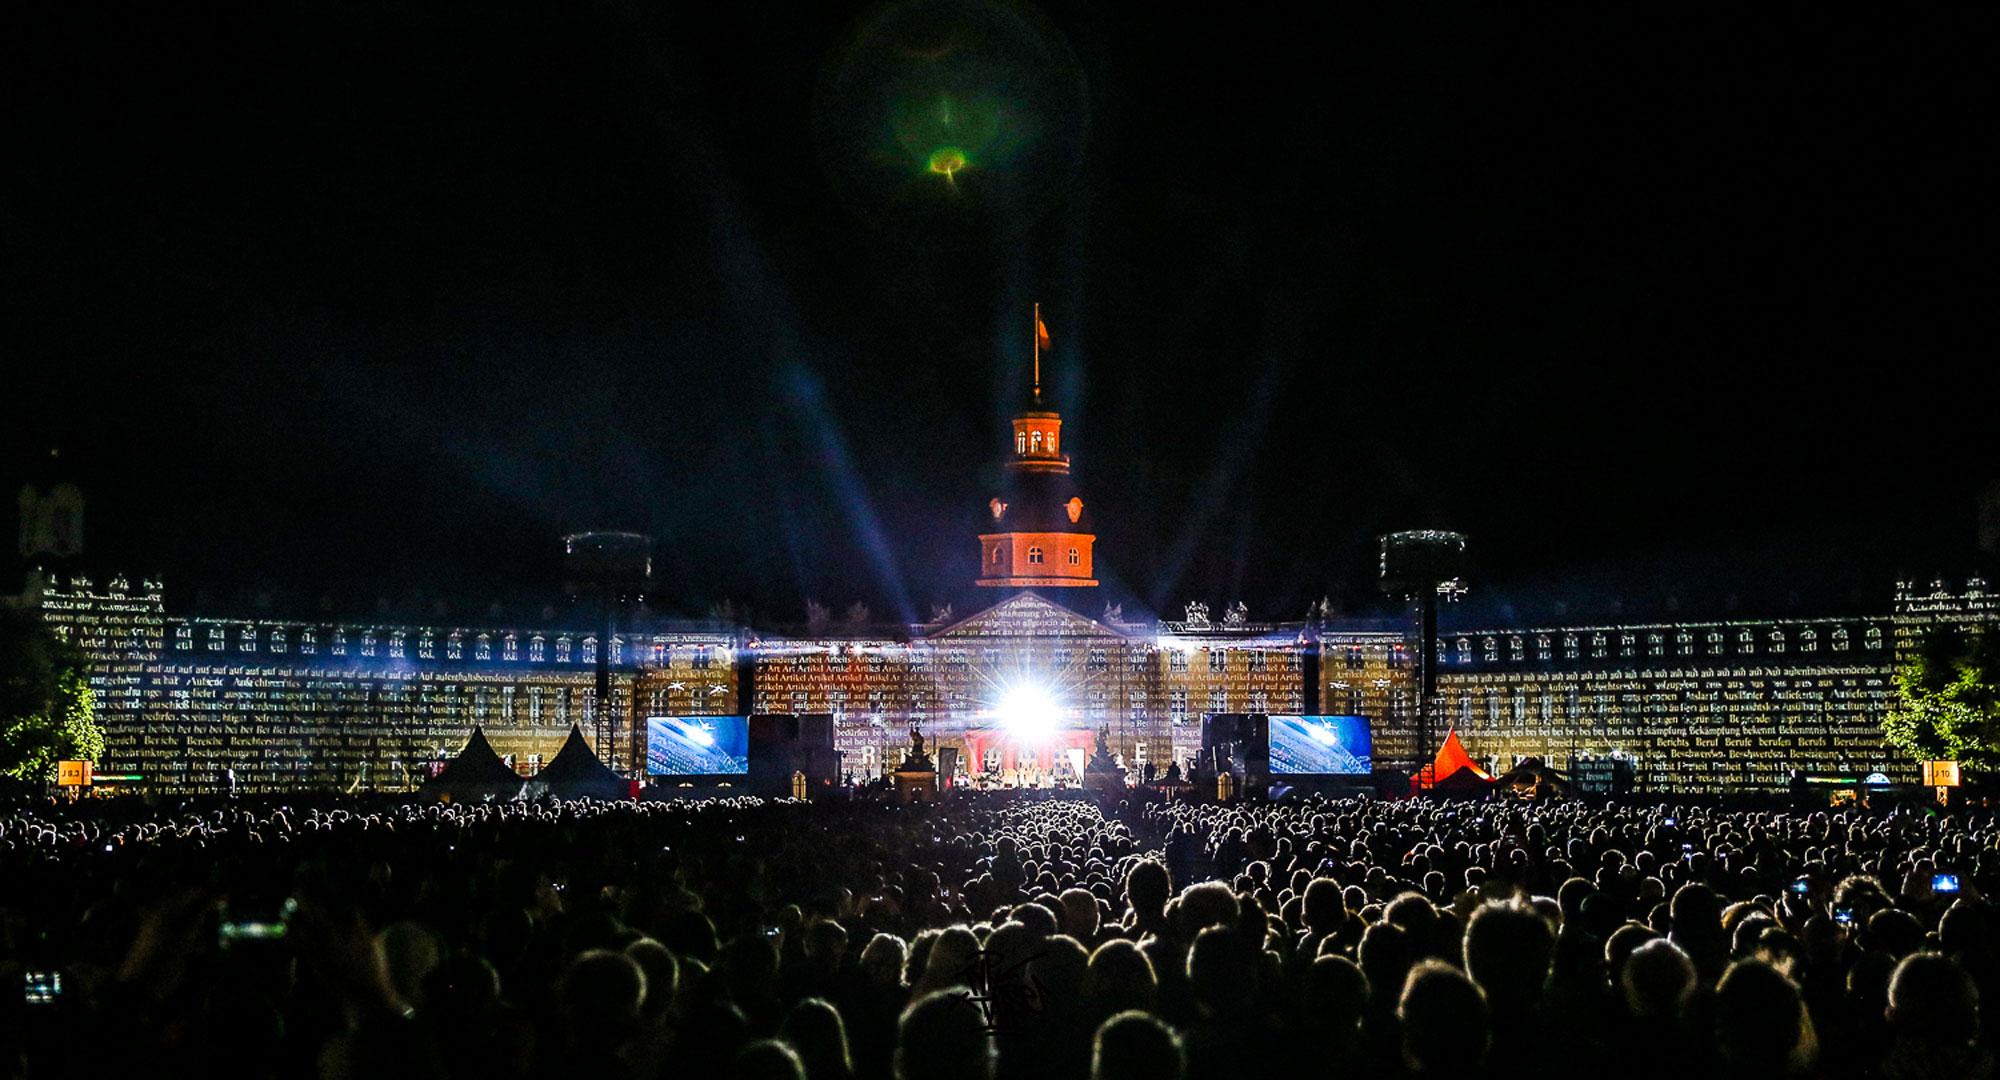 A sea of people watch video mapping on a building. There is a performance on stage.